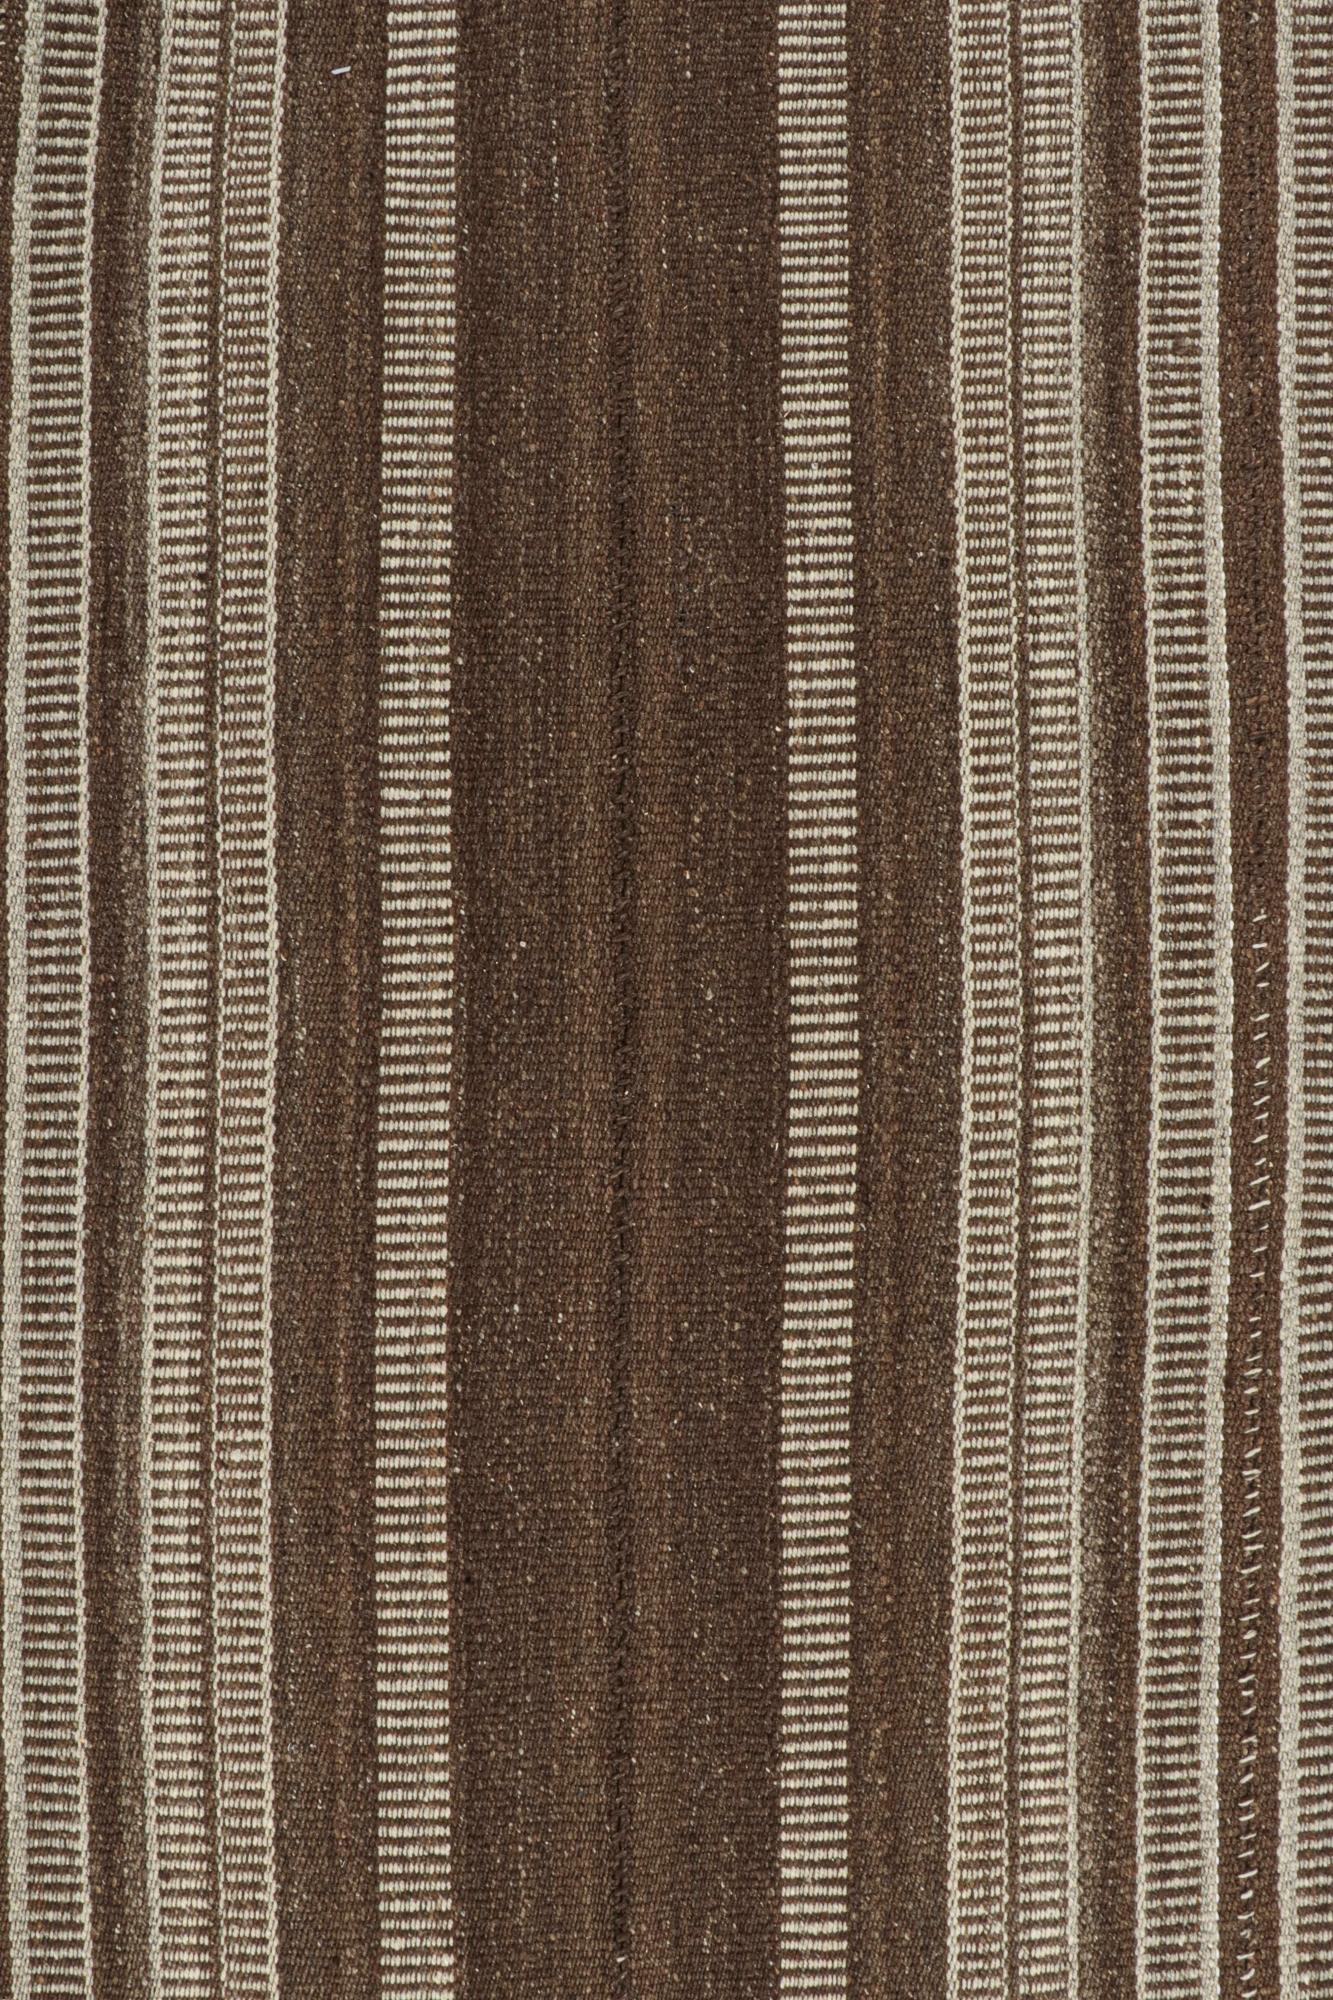 Tribal Vintage Persian Kilim in Beige-Brown & White Stripes, Panel Style For Sale